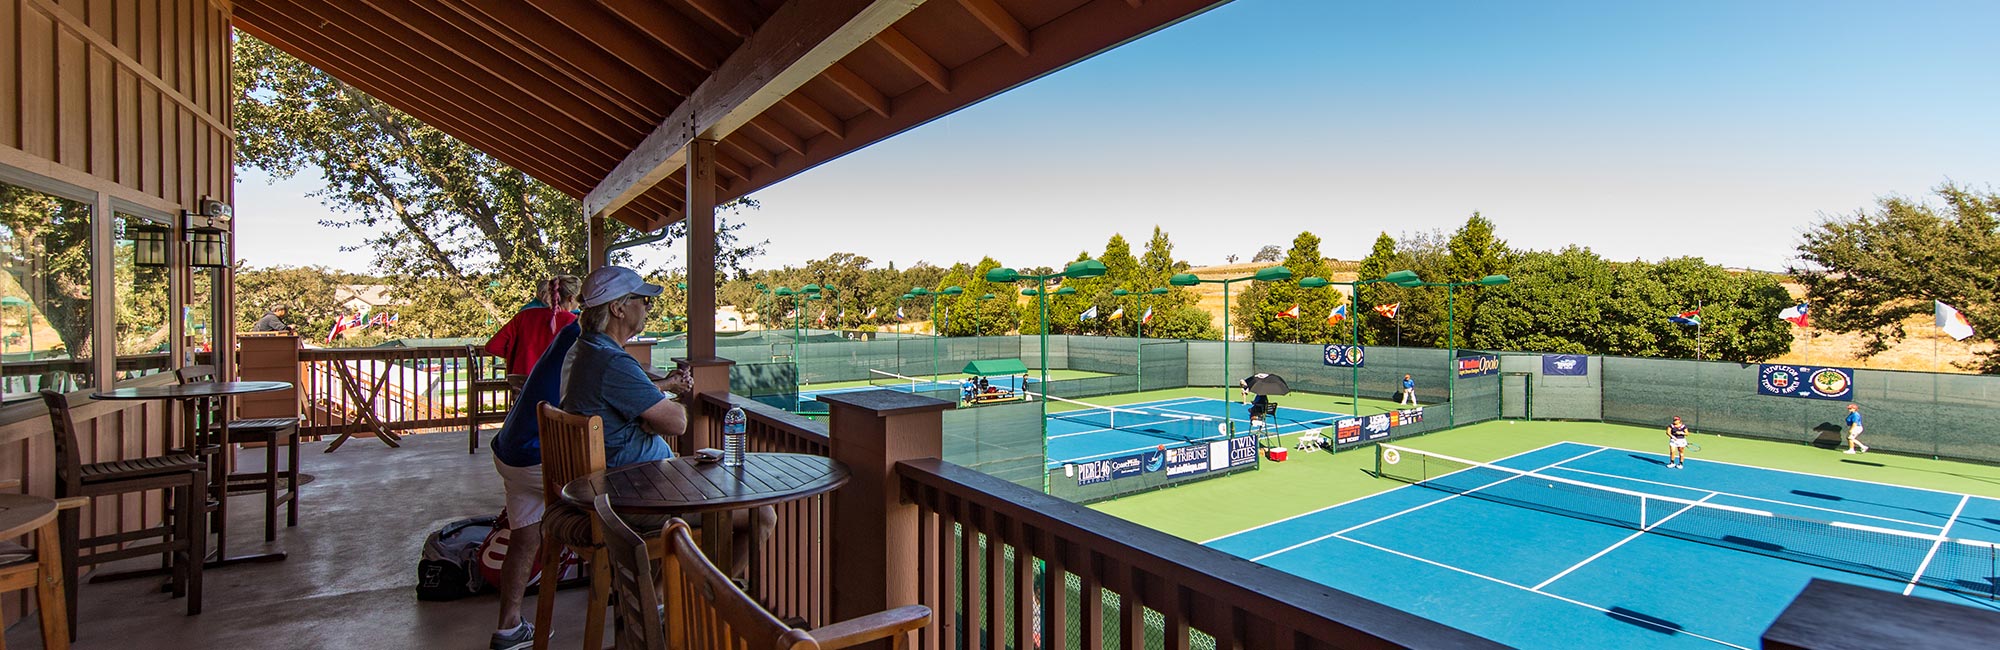 Adult Tennis Clinics and Lessons